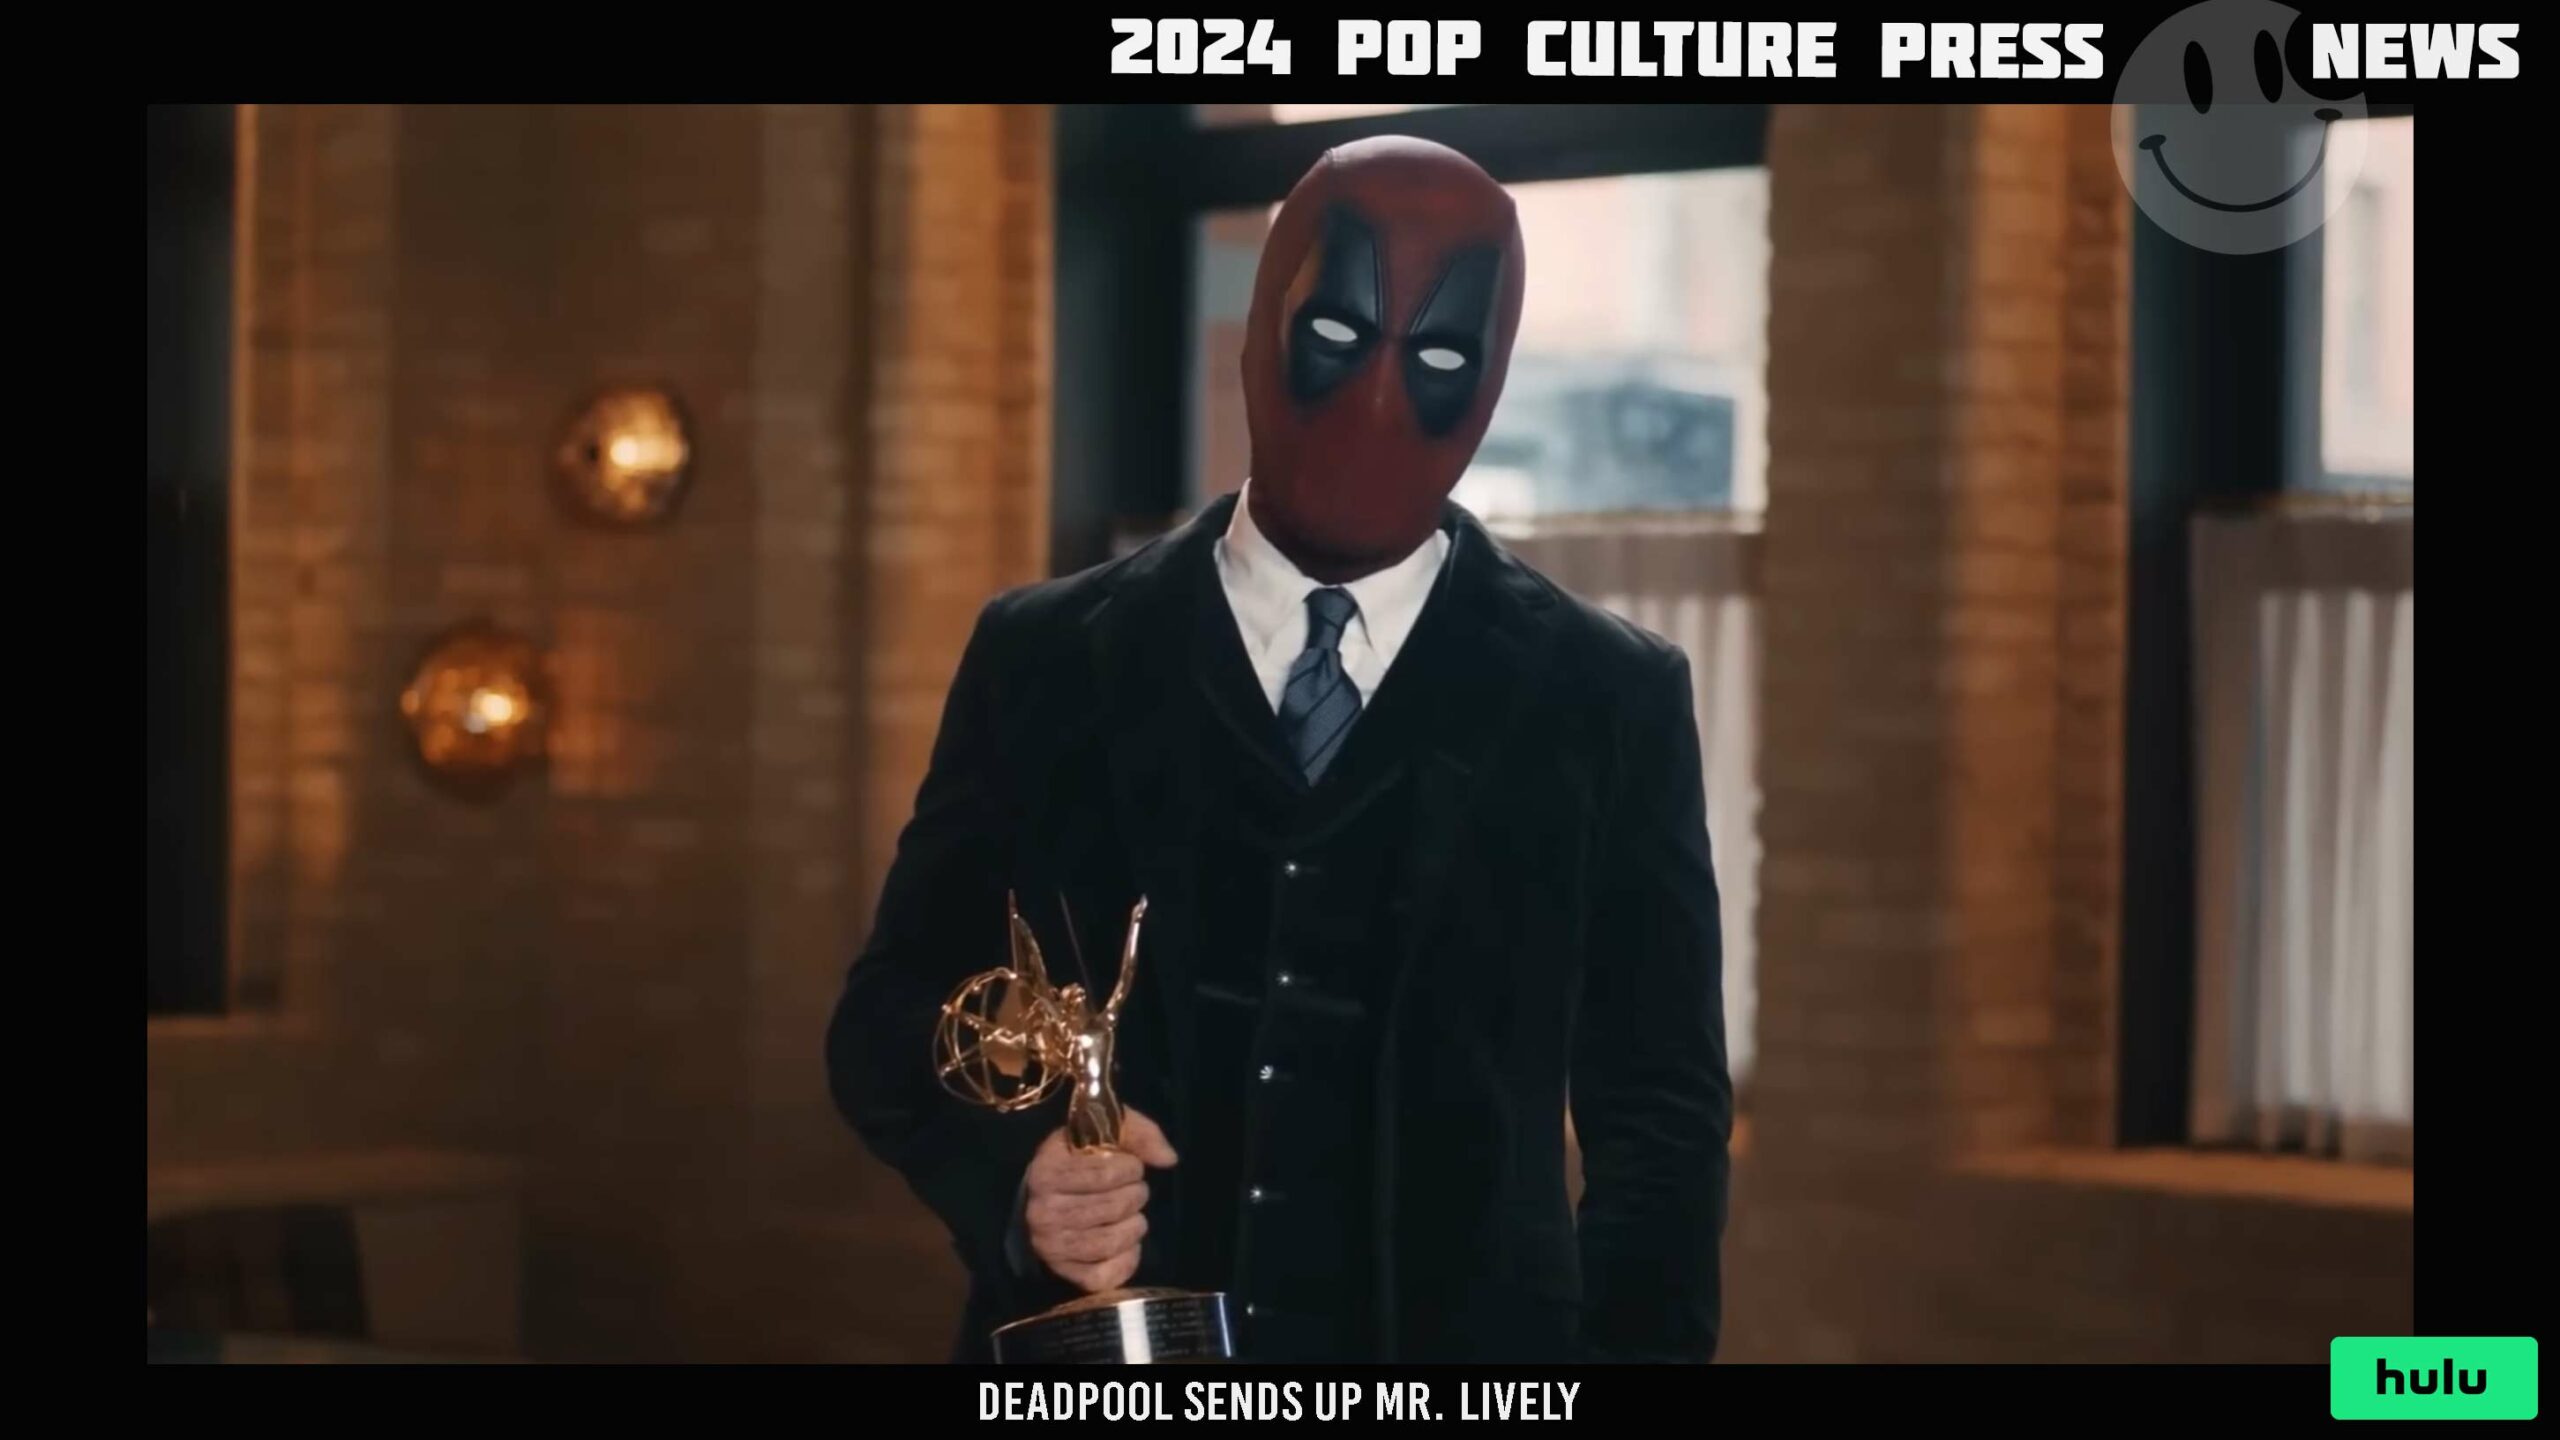 Ryan Reynolds as Deadpool, holding Hugh Jackman's broken Emmy, referring to himself as Mr. Lively, promoting 'Welcome to Wrexham